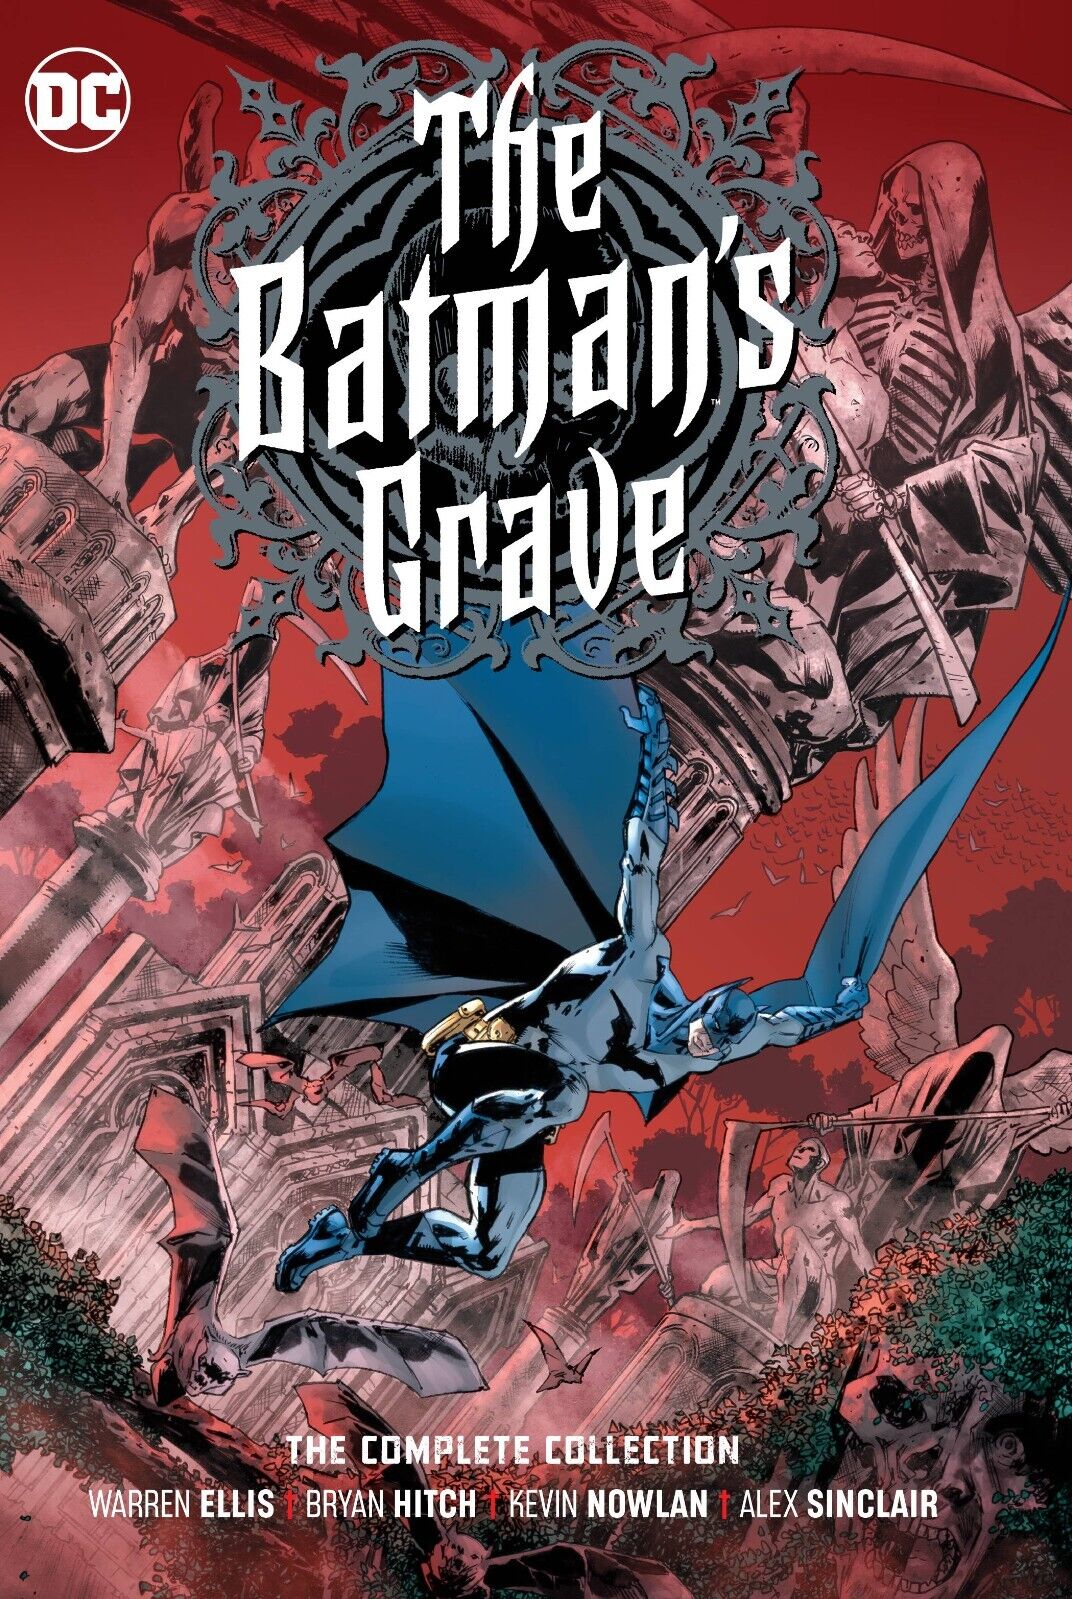 DC COMICS THE BATMANS GRAVE THE COMPLETE COLLECTION HARDCOVER ALFRED PENNYWORTH